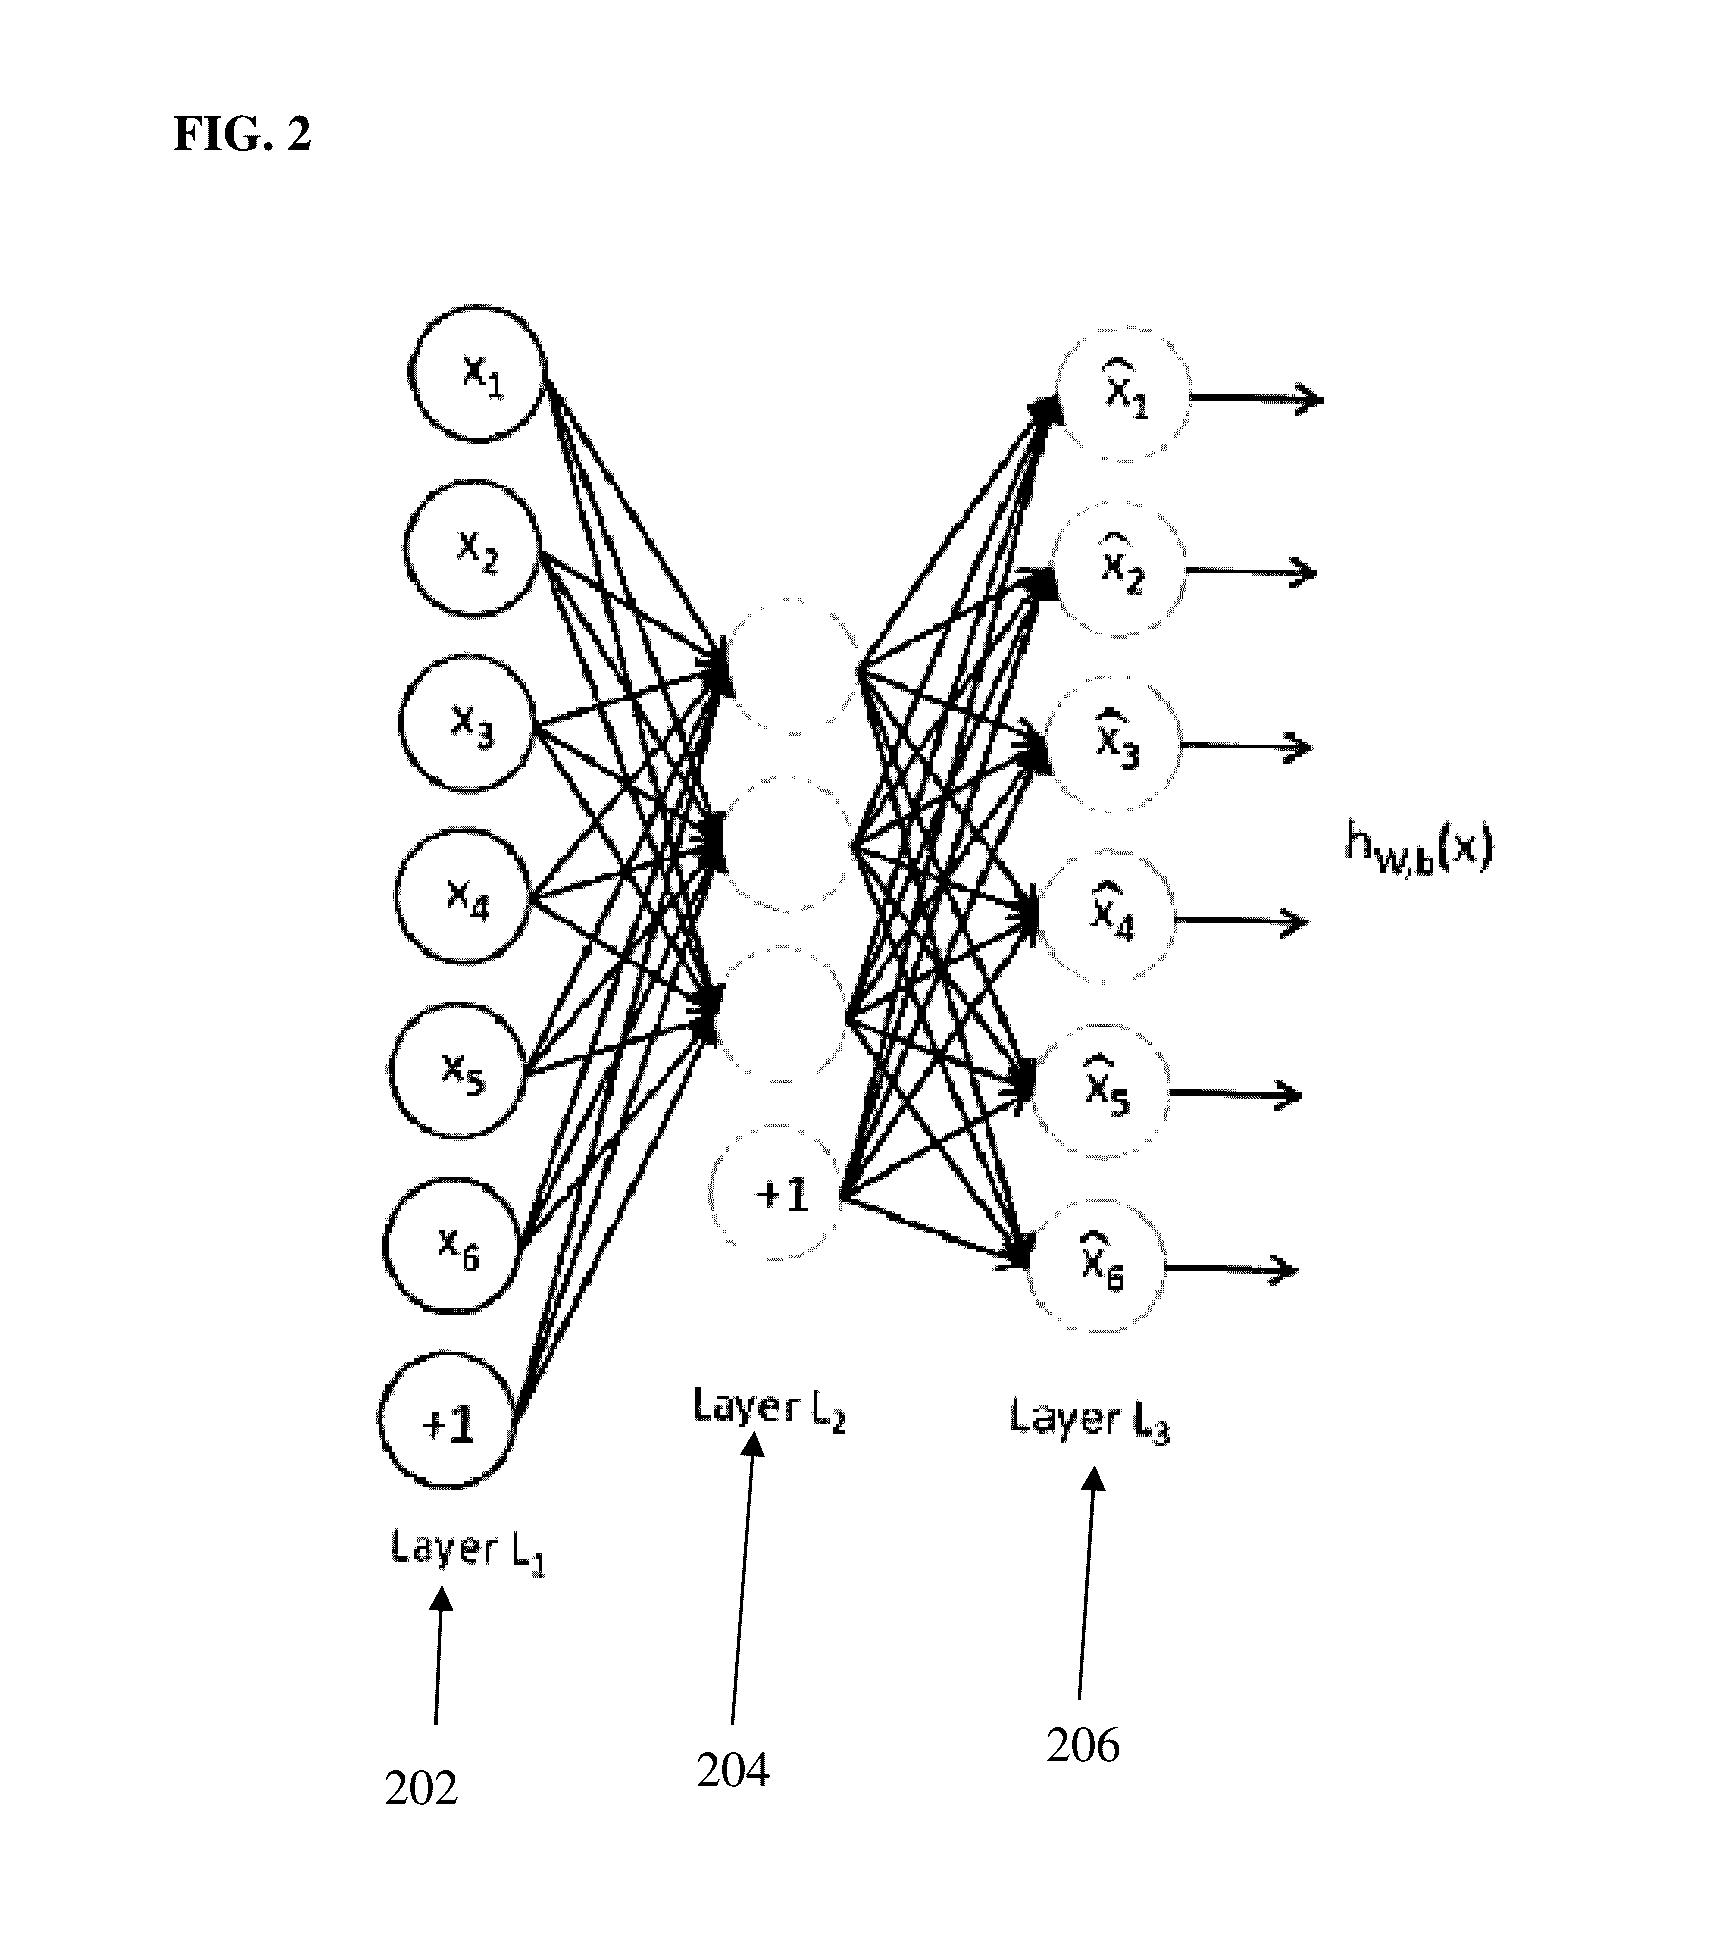 Method and System for Approximating Deep Neural Networks for Anatomical Object Detection